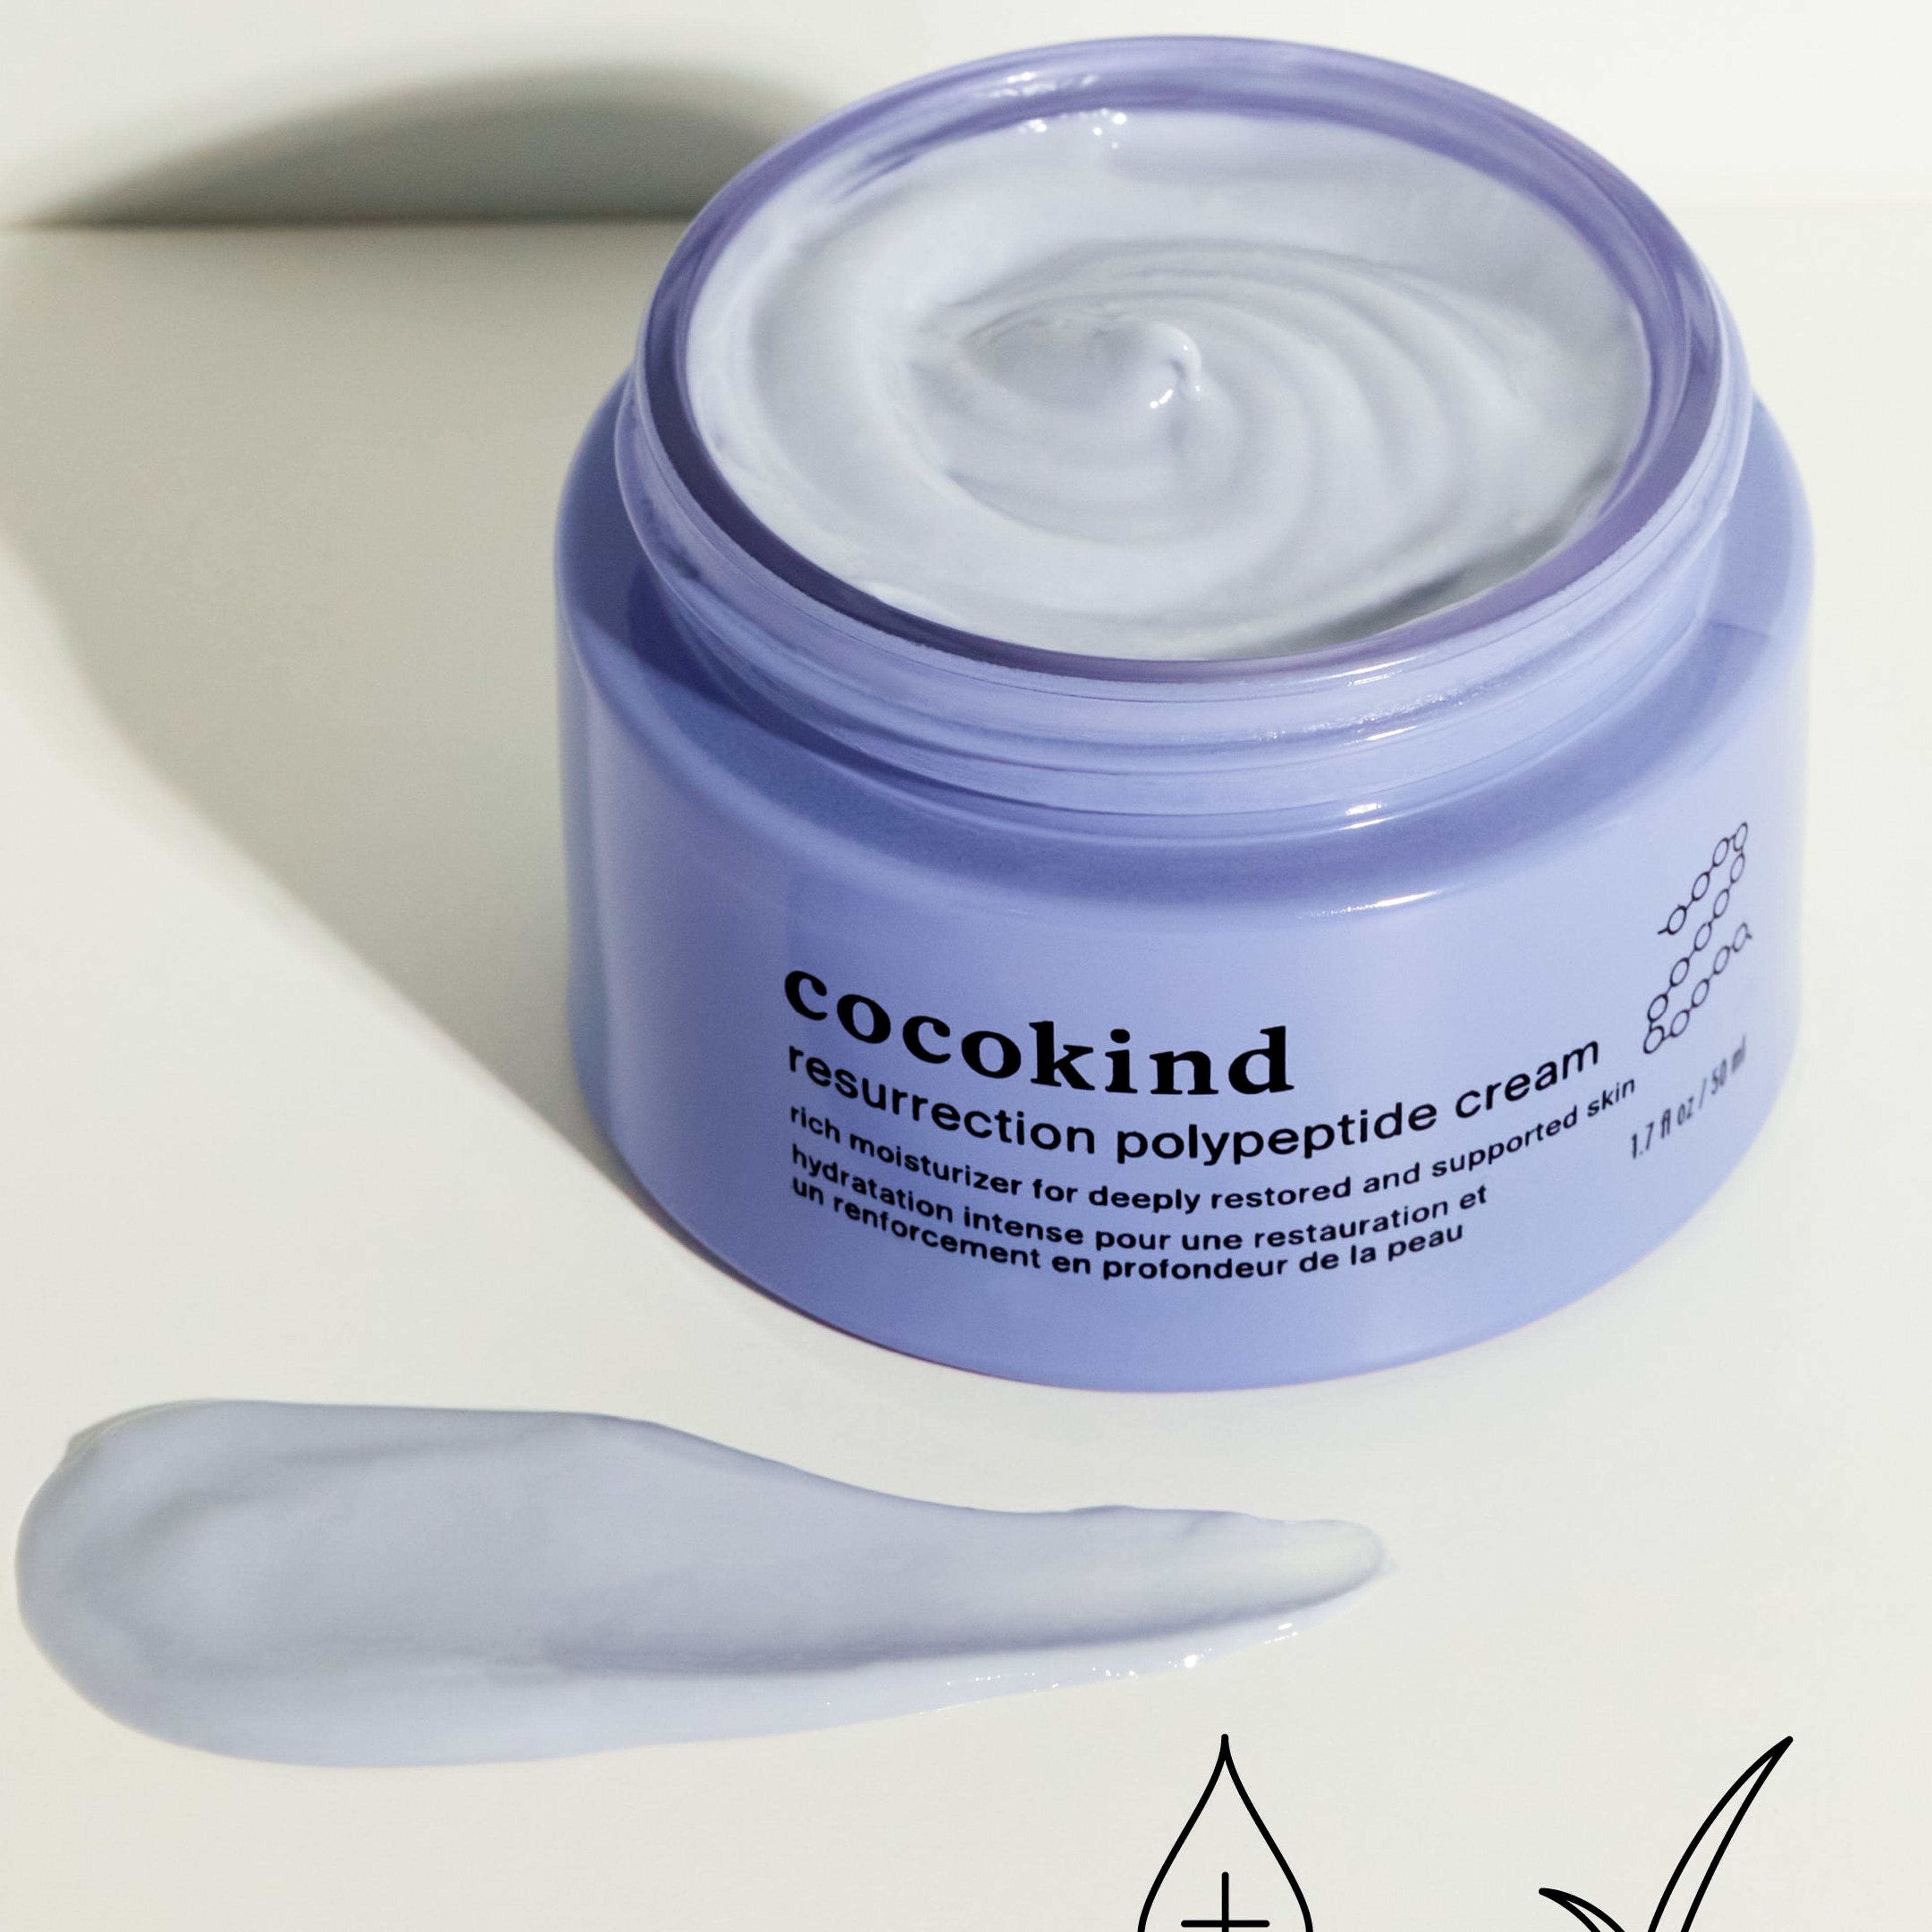 www.cocokind.com/products/resurrection-polypeptide-cream